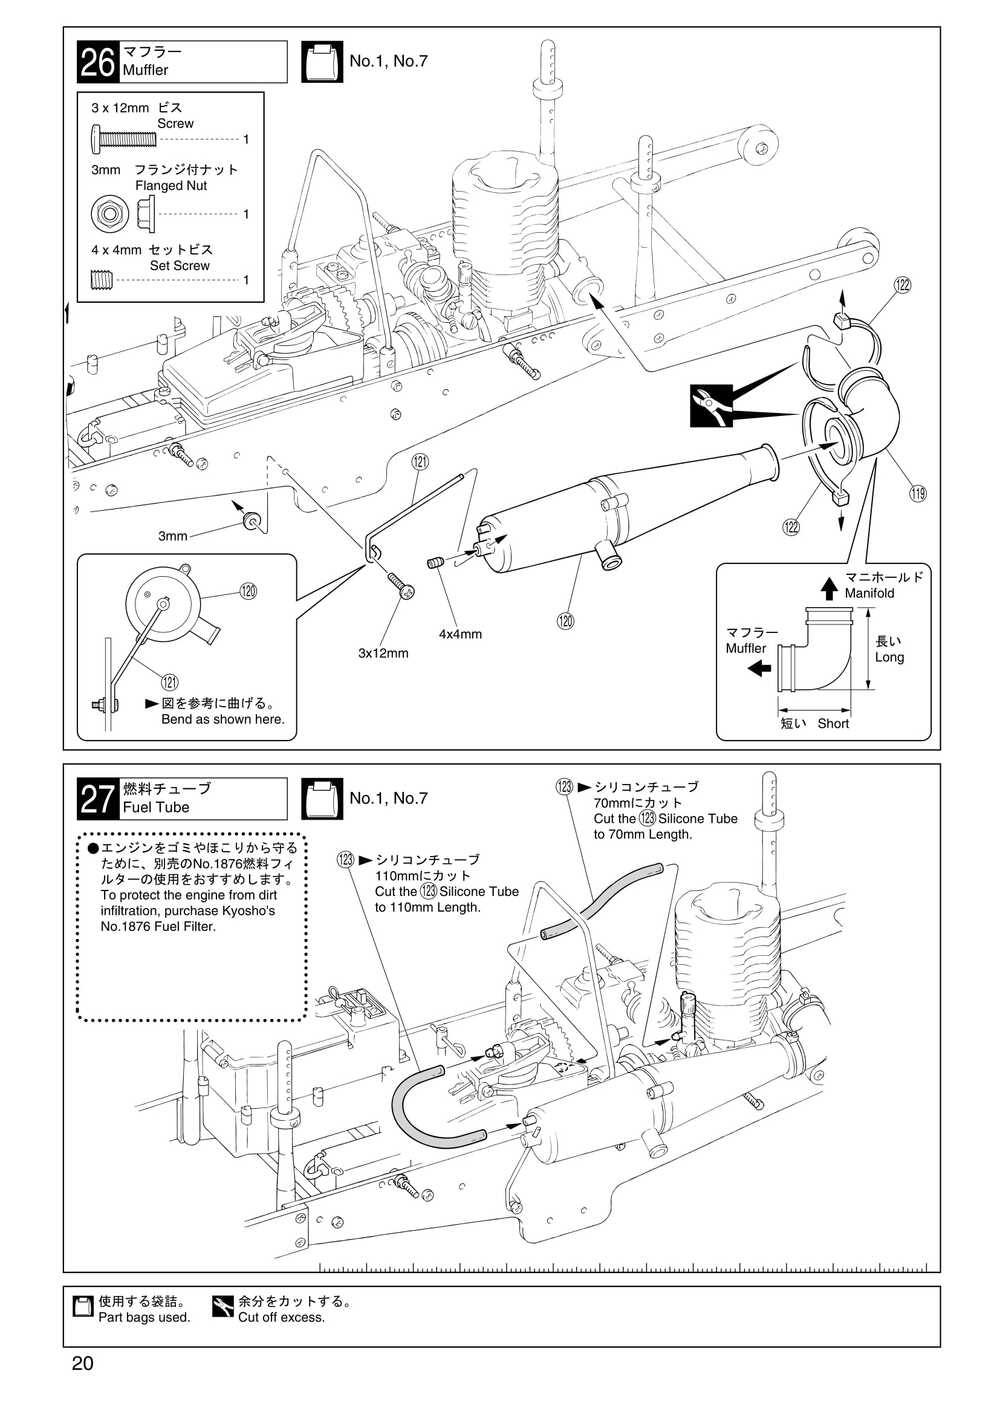 Kyosho - 31221 - Mad-Force - Manual - Page 20